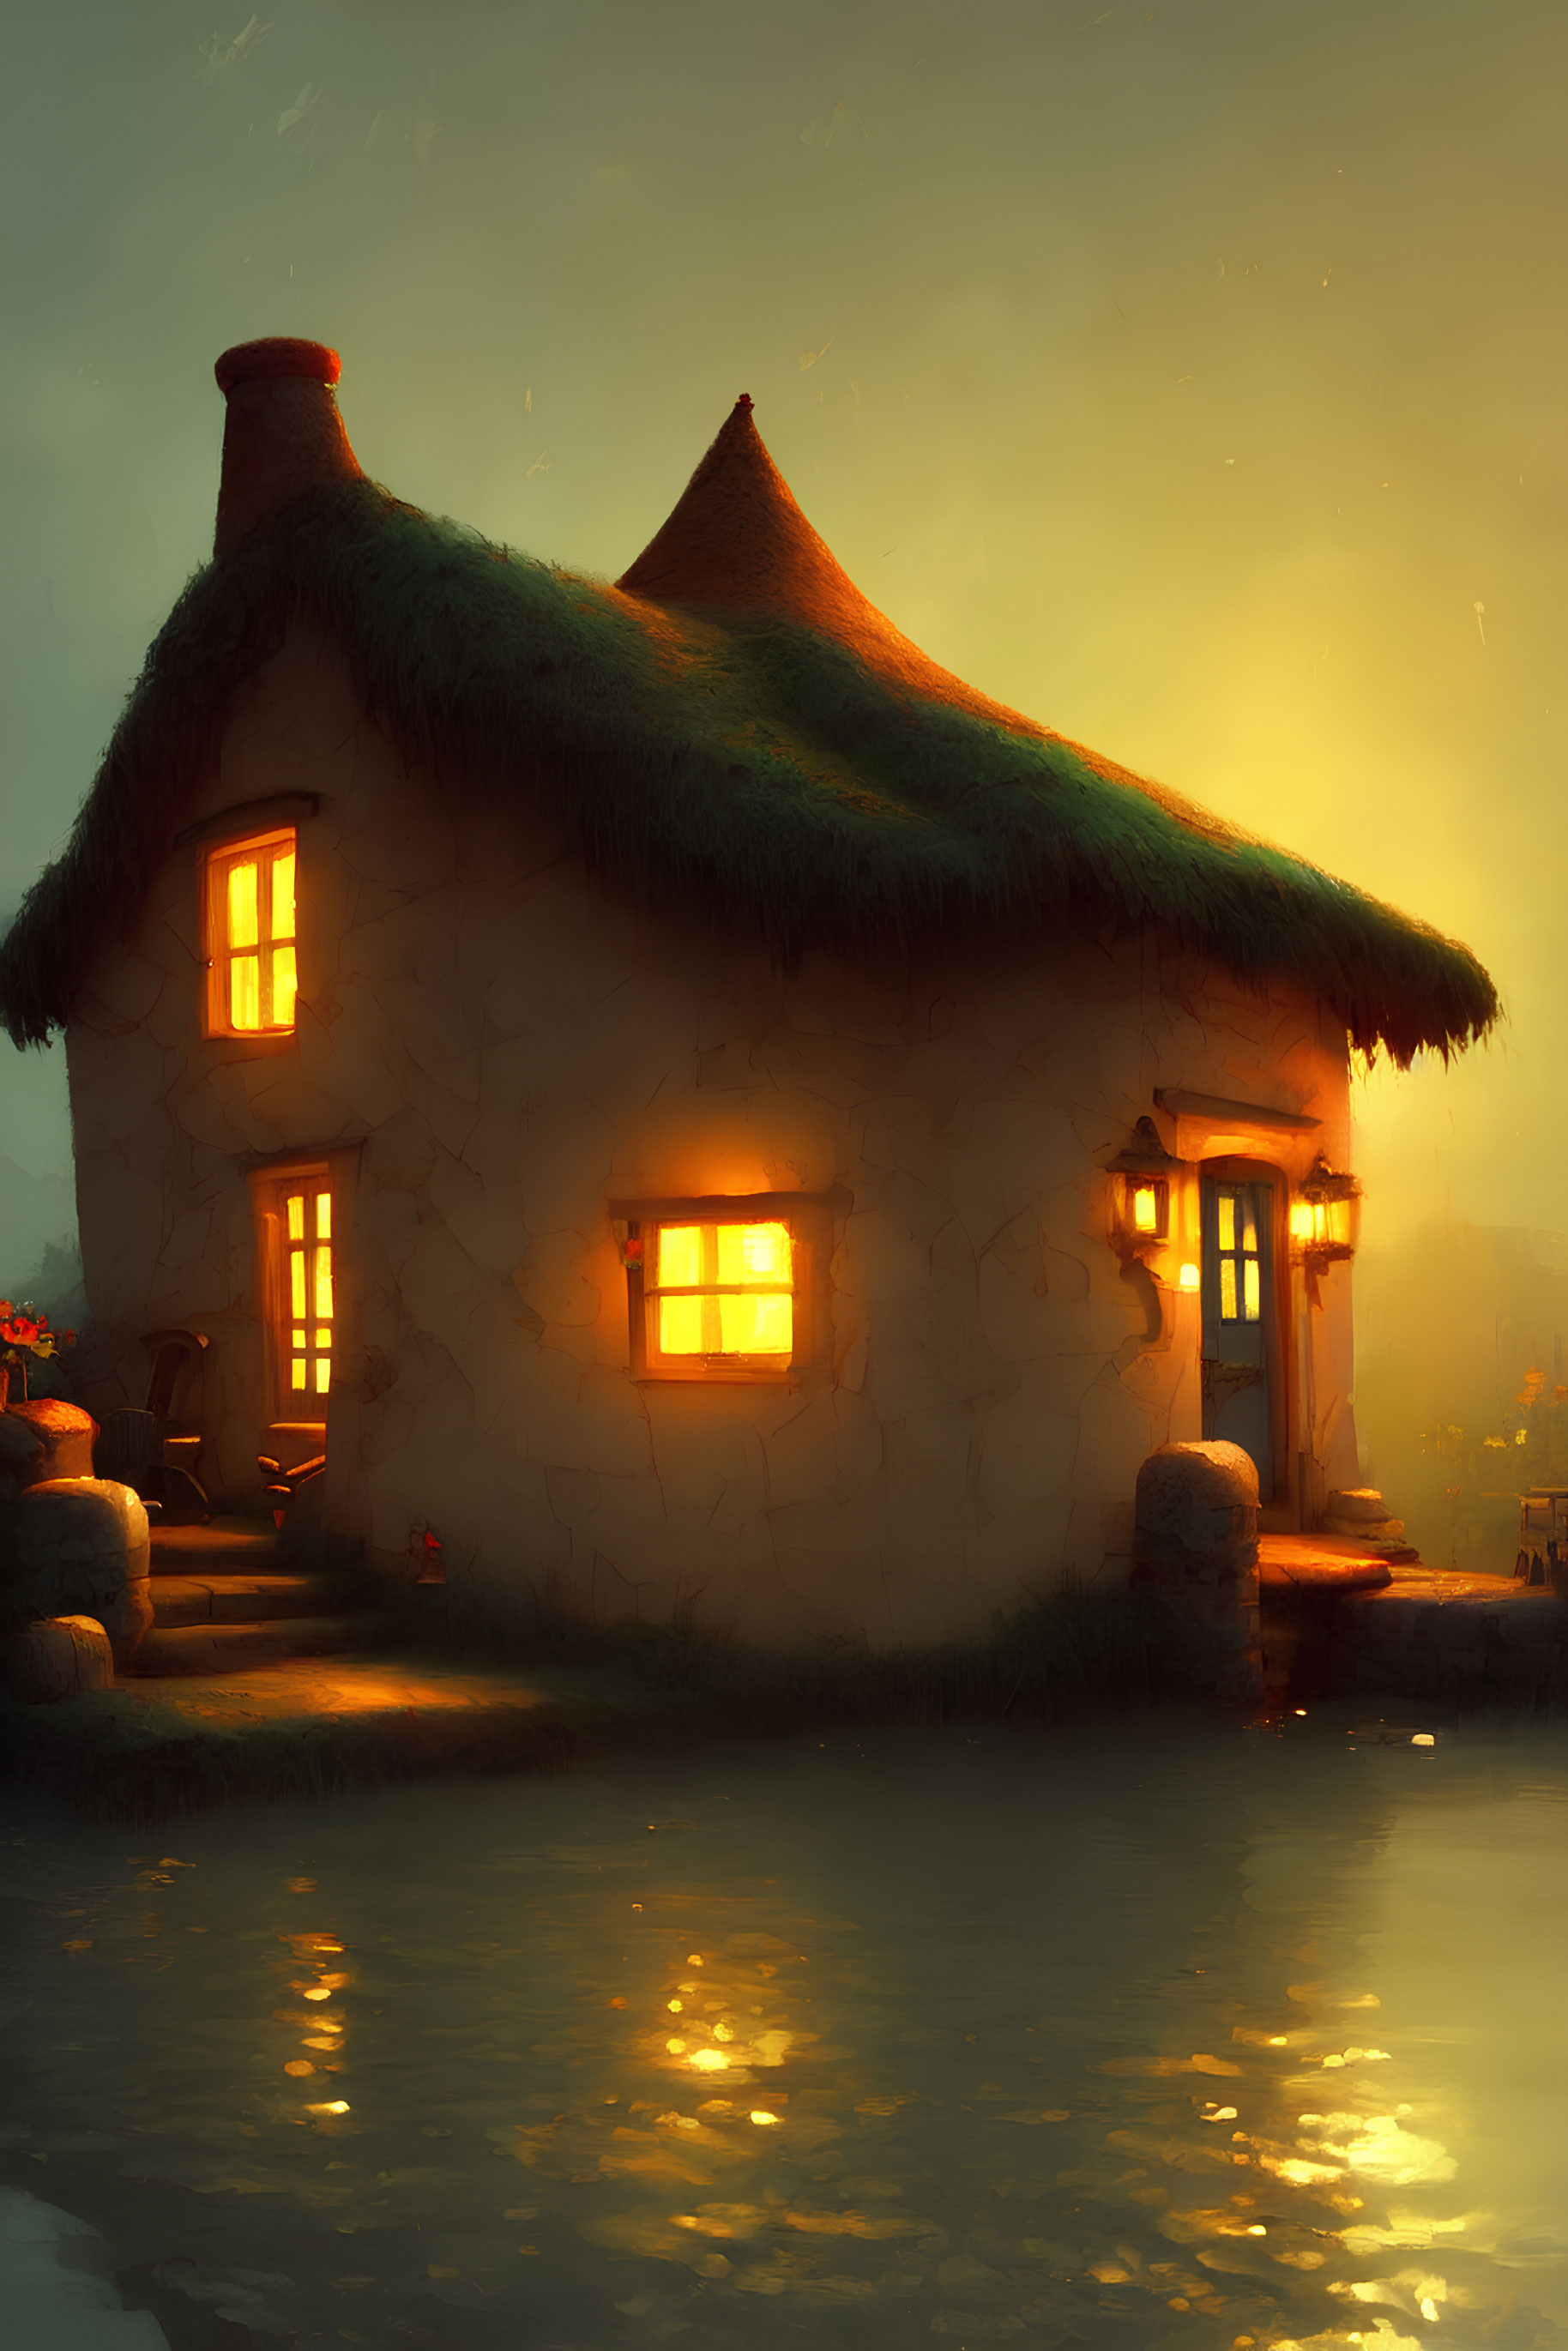 Quaint Thatched-Roof Cottage Reflects on Serene Water at Dusk